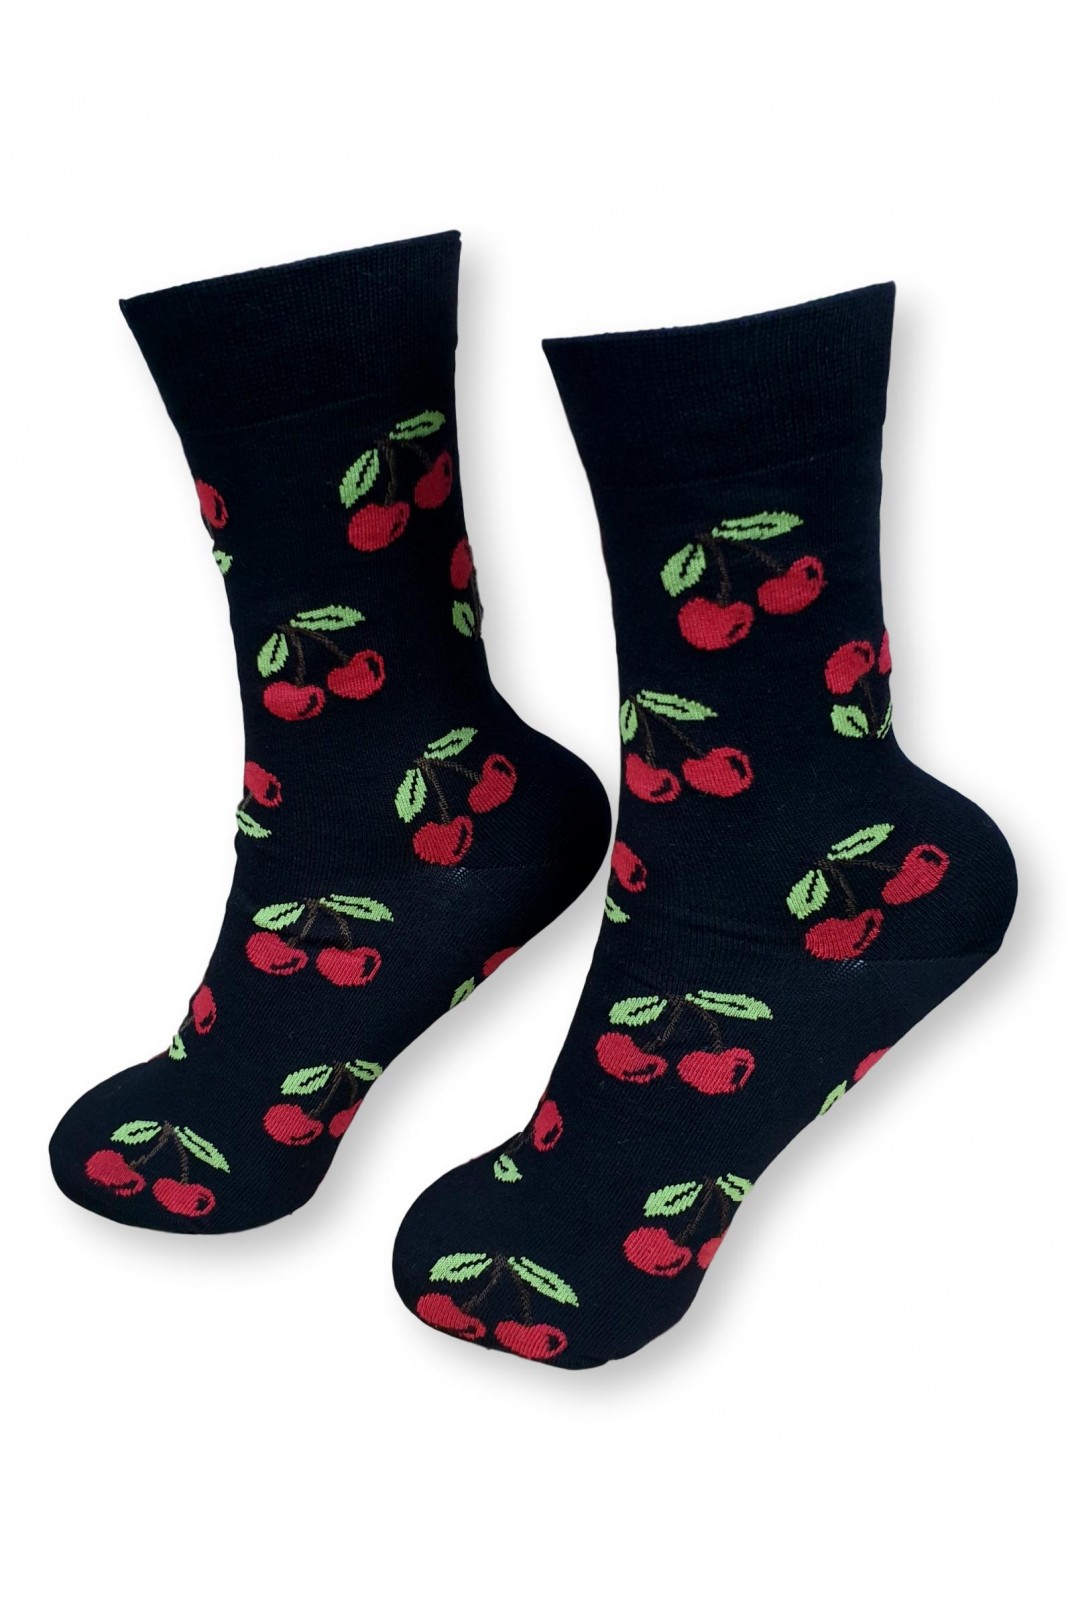 Womens Socks with Cherry patterns ONESIZE 36-41